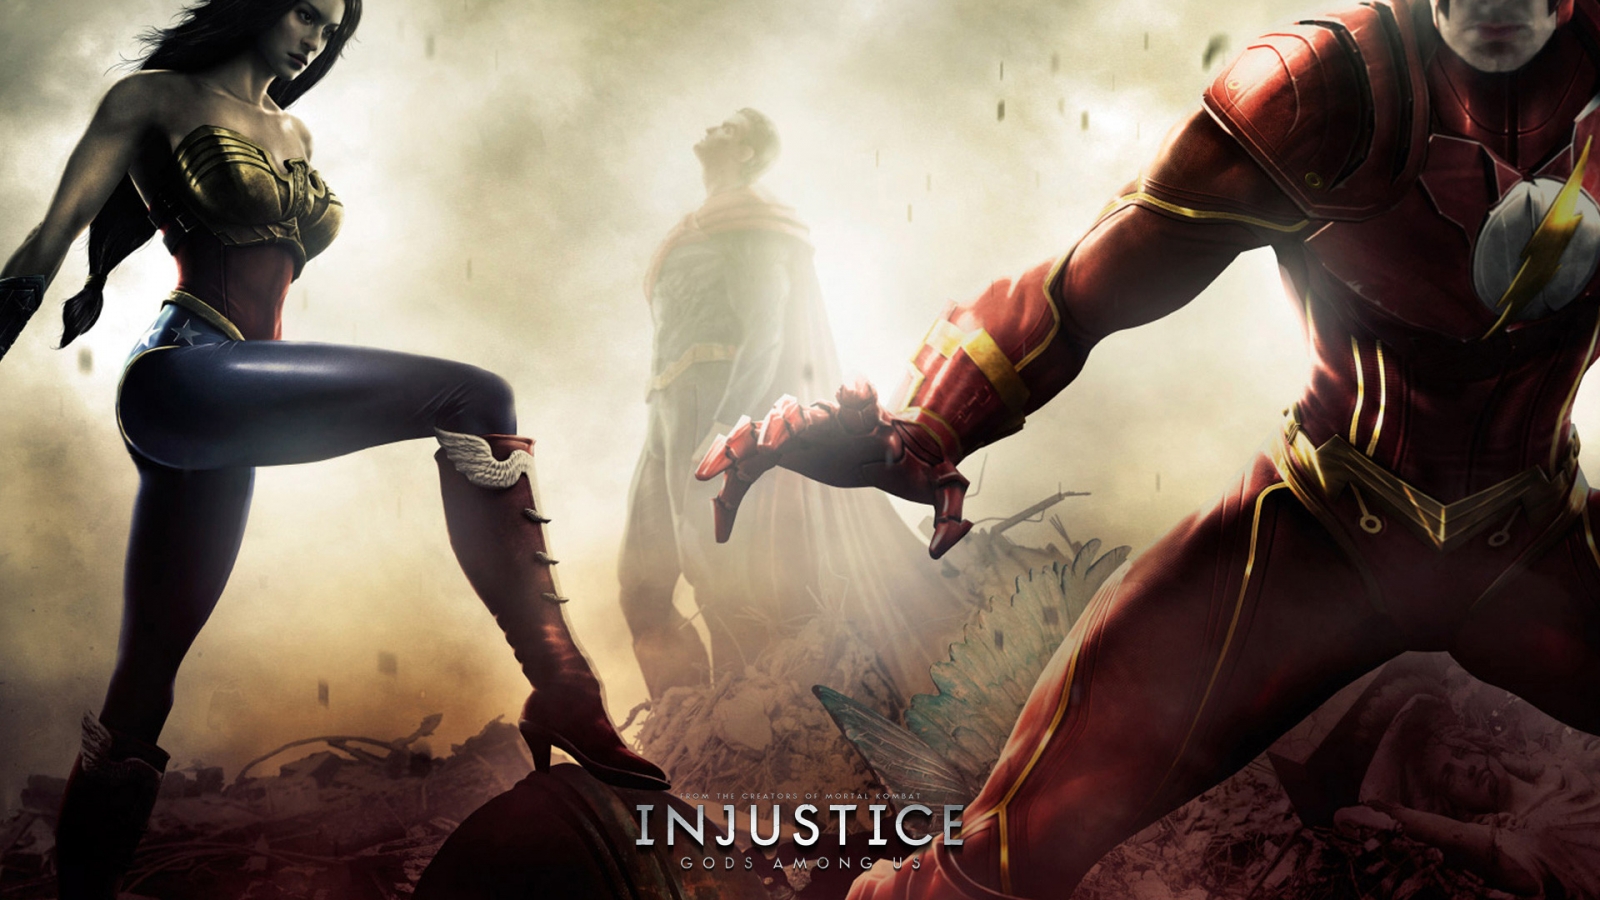 Injustice Gods Among Us Game for 1600 x 900 HDTV resolution